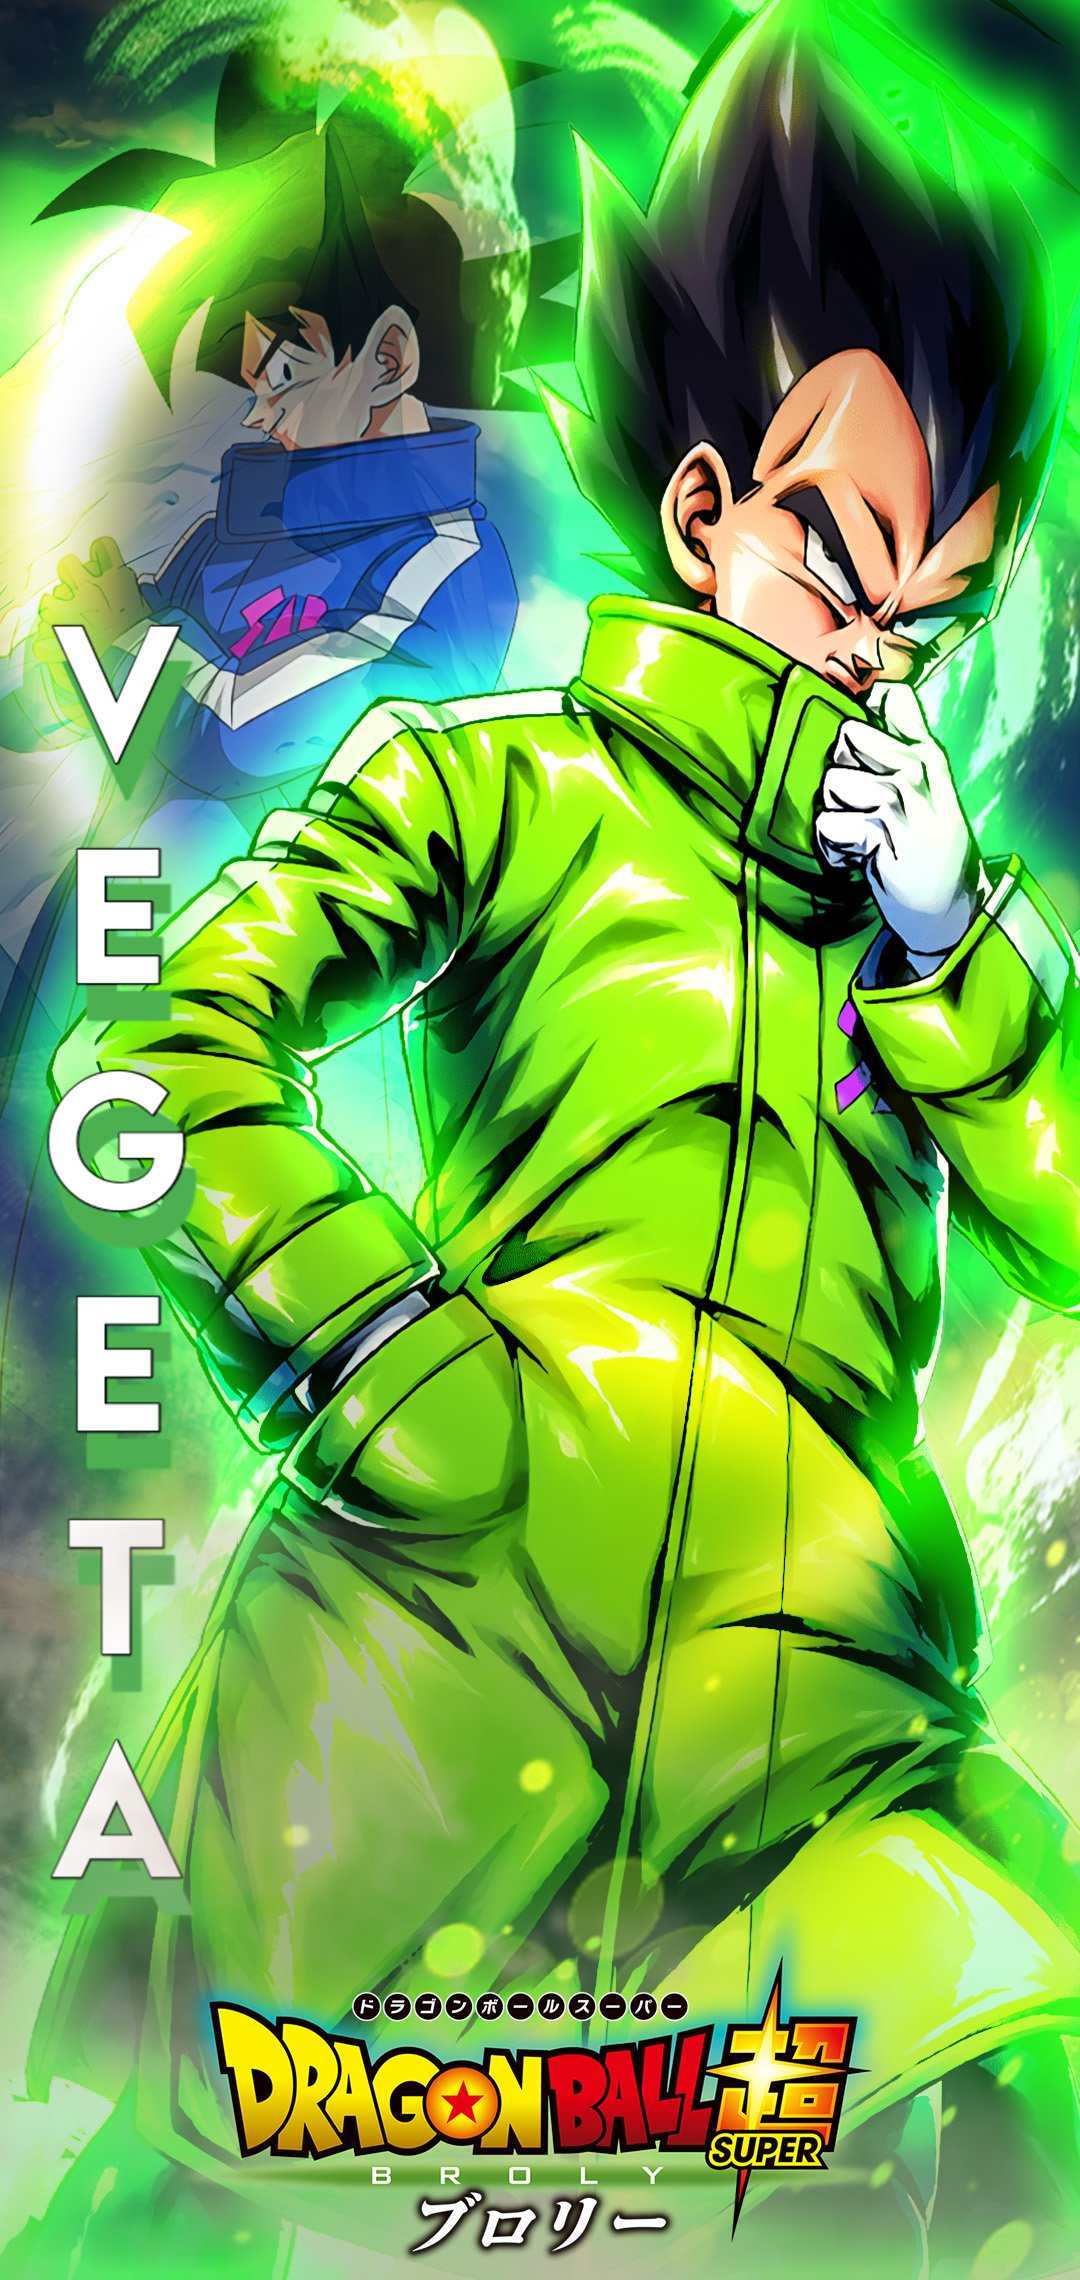 Icy - *FREE* Drip Goku & Drip Vegeta Wallpaper!! Your free to use how you want! ♥️ &